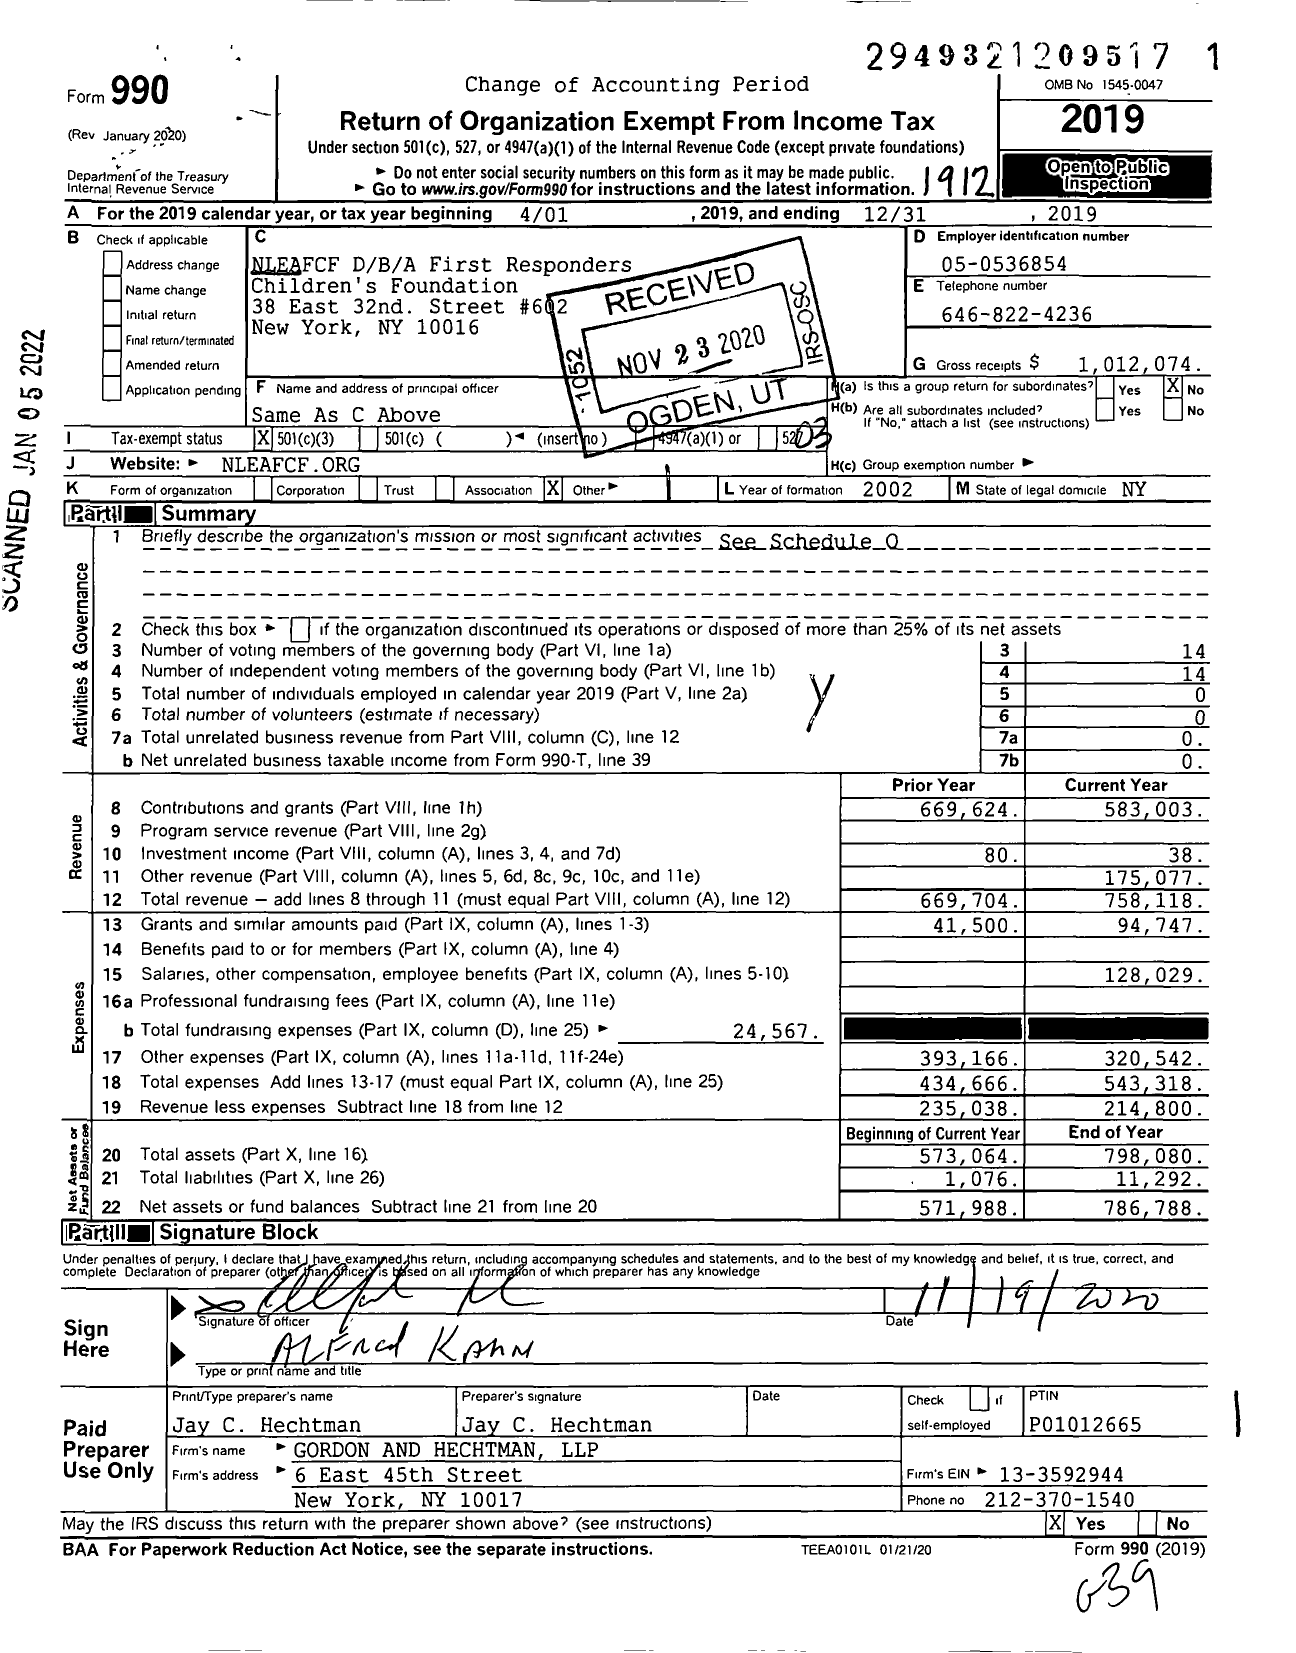 Image of first page of 2019 Form 990 for First Responders Childrens Foundation